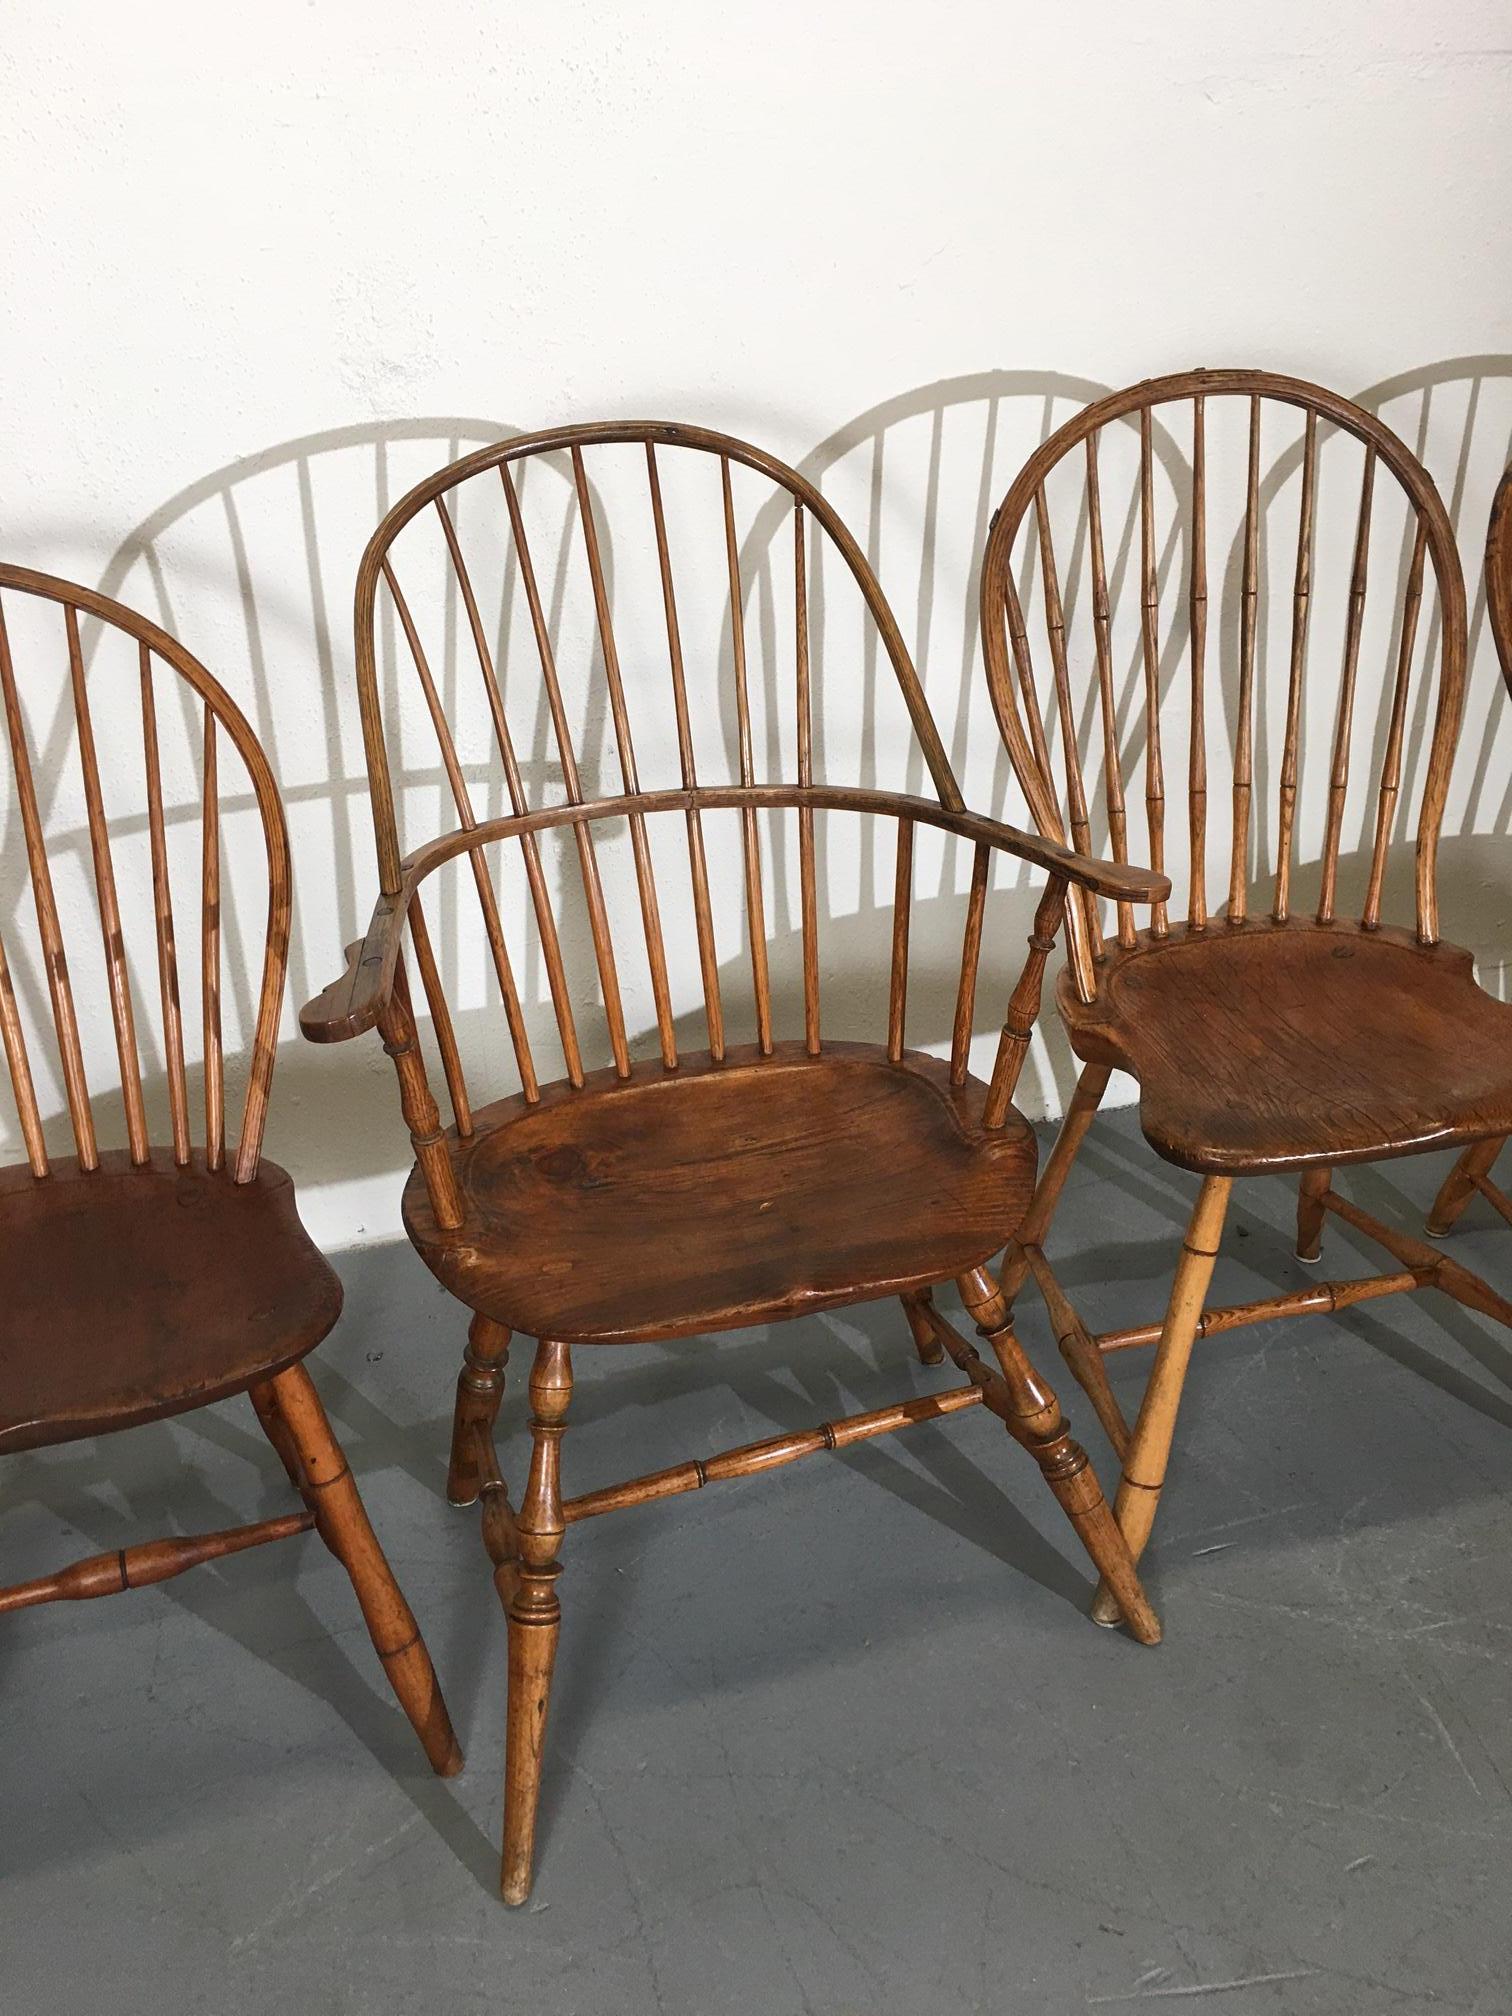 19th set of four rustic dining chairs. They are slightly different in size. It makes them charming.